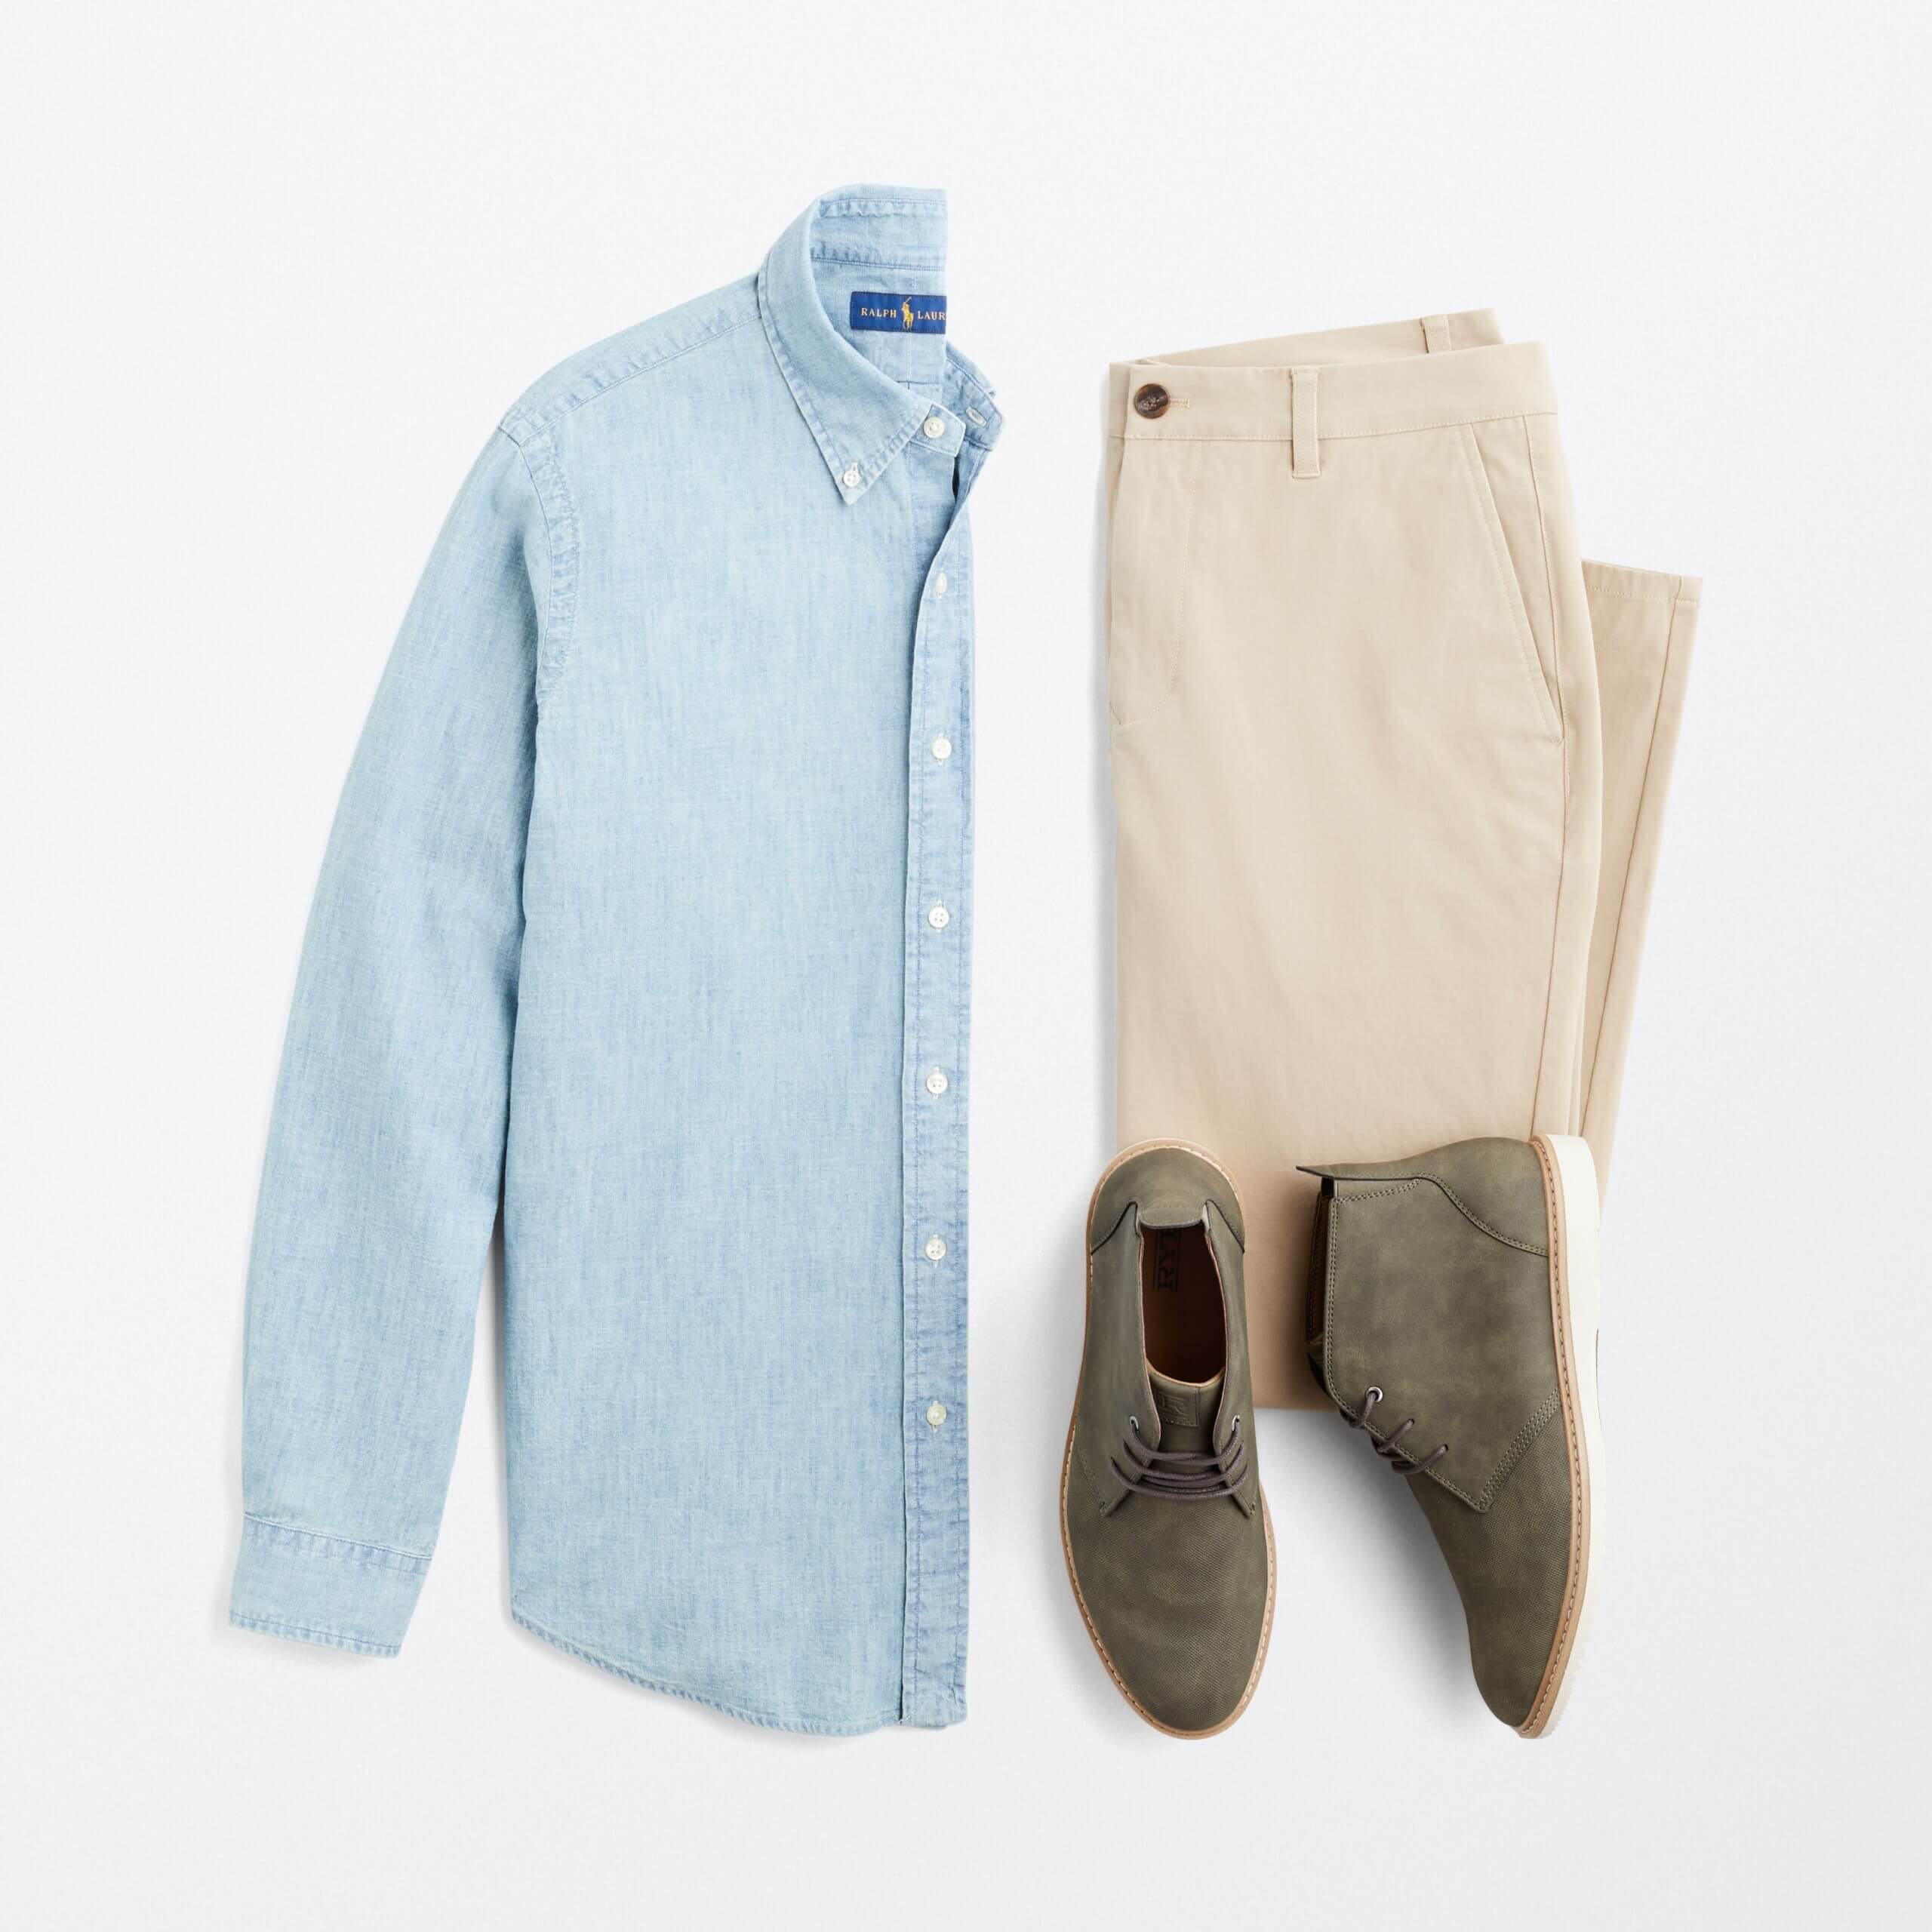 Men's White Long Sleeve Shirt, Beige Chinos, Grey Suede Loafers